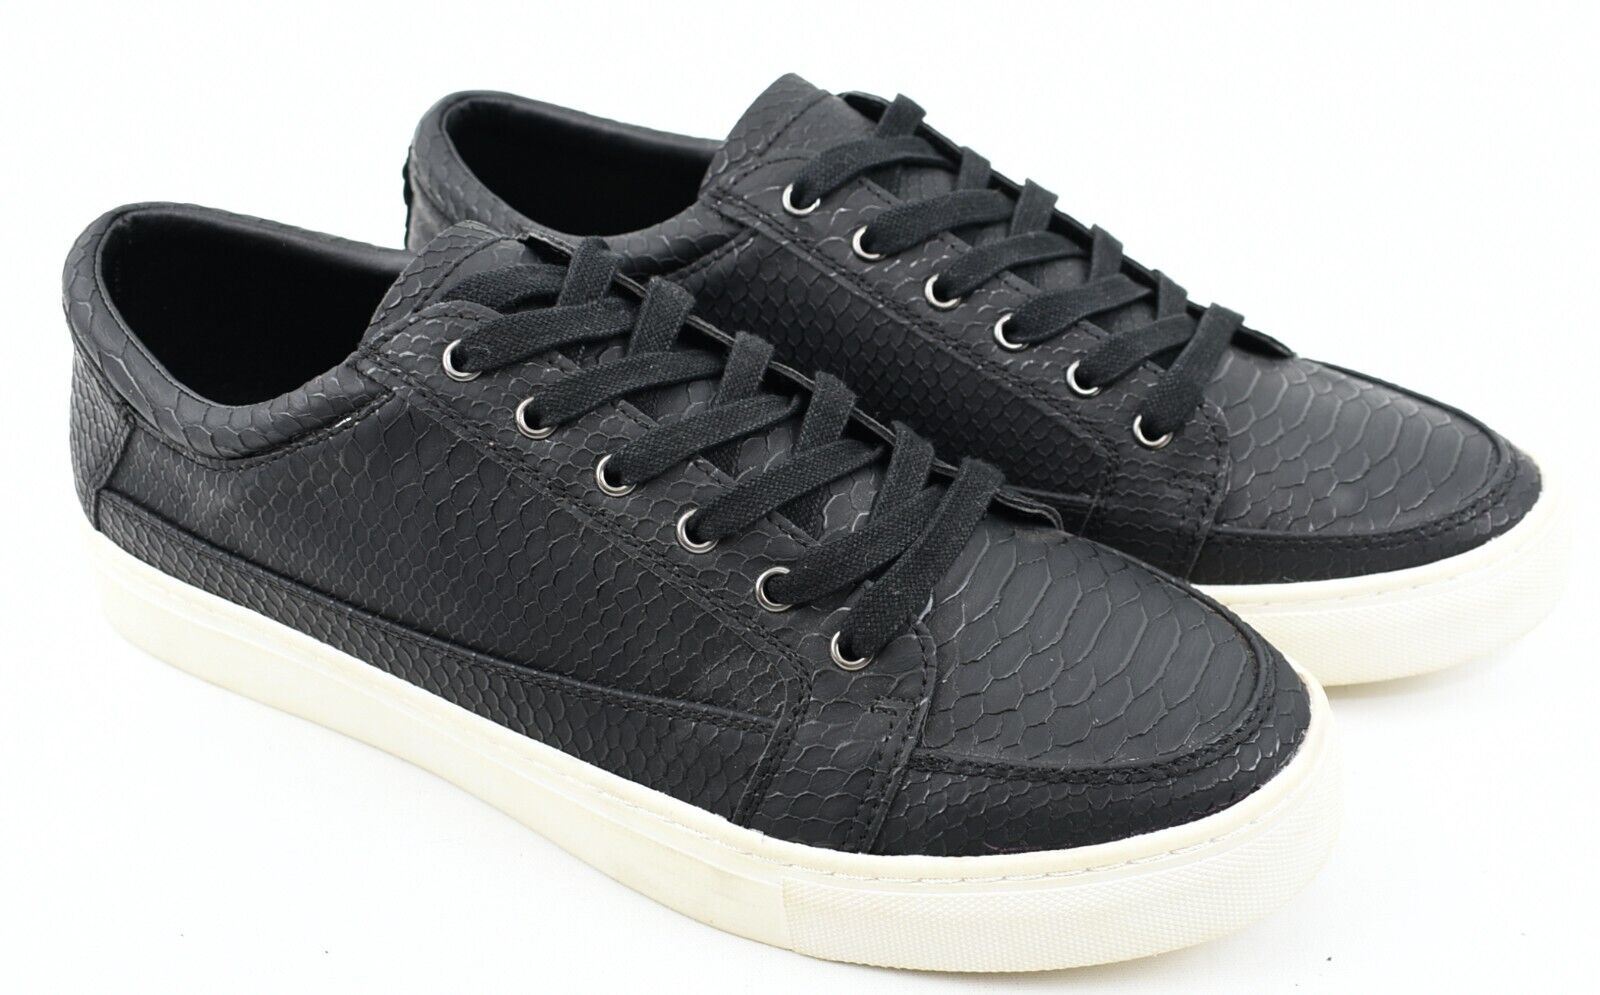 KURT GEIGER Mens Faux Leather Trainers Sneakers, Black, size UK 9 *EX DISPLAY*